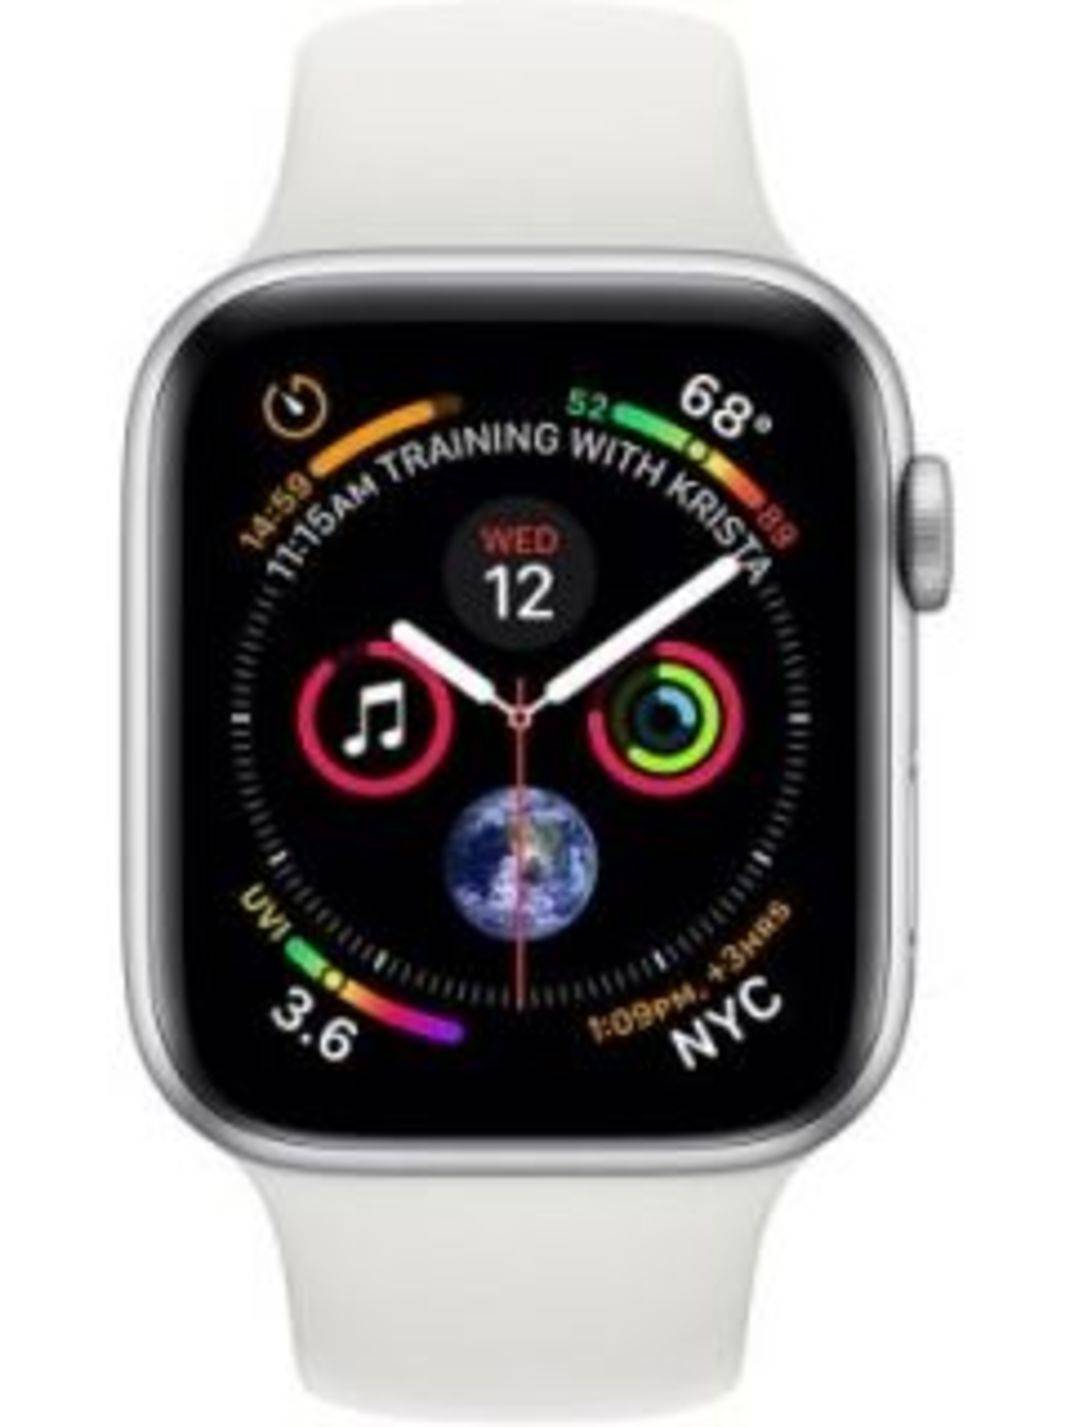 Compare Watch Series 4 vs Garmin vivoactive 3 Music - Apple Watch Series 4 vs Garmin vivoactive Music Comparison by Price, Reviews &amp; Features | Gadgets Now